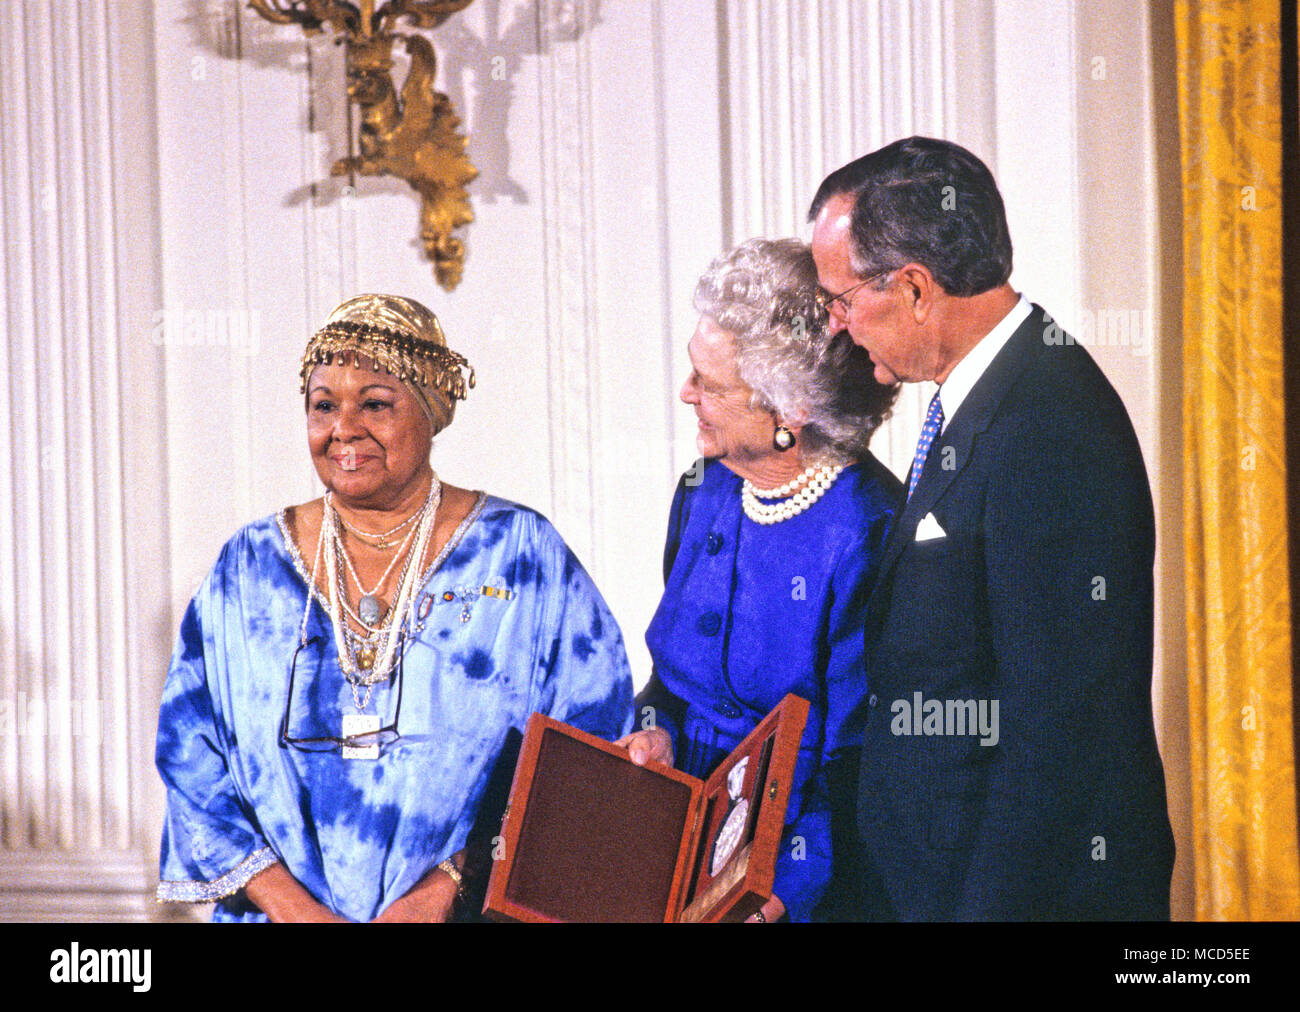 United States President George H.W. Bush and first lady Barbara Bush present the National Medal of Arts to American dancer and choreographer Katherine Dunham during a ceremony in the East Room of the White House in Washington, DC on November 19, 1989. Credit: Ron Sachs/CNP /MediaPunch Stock Photo